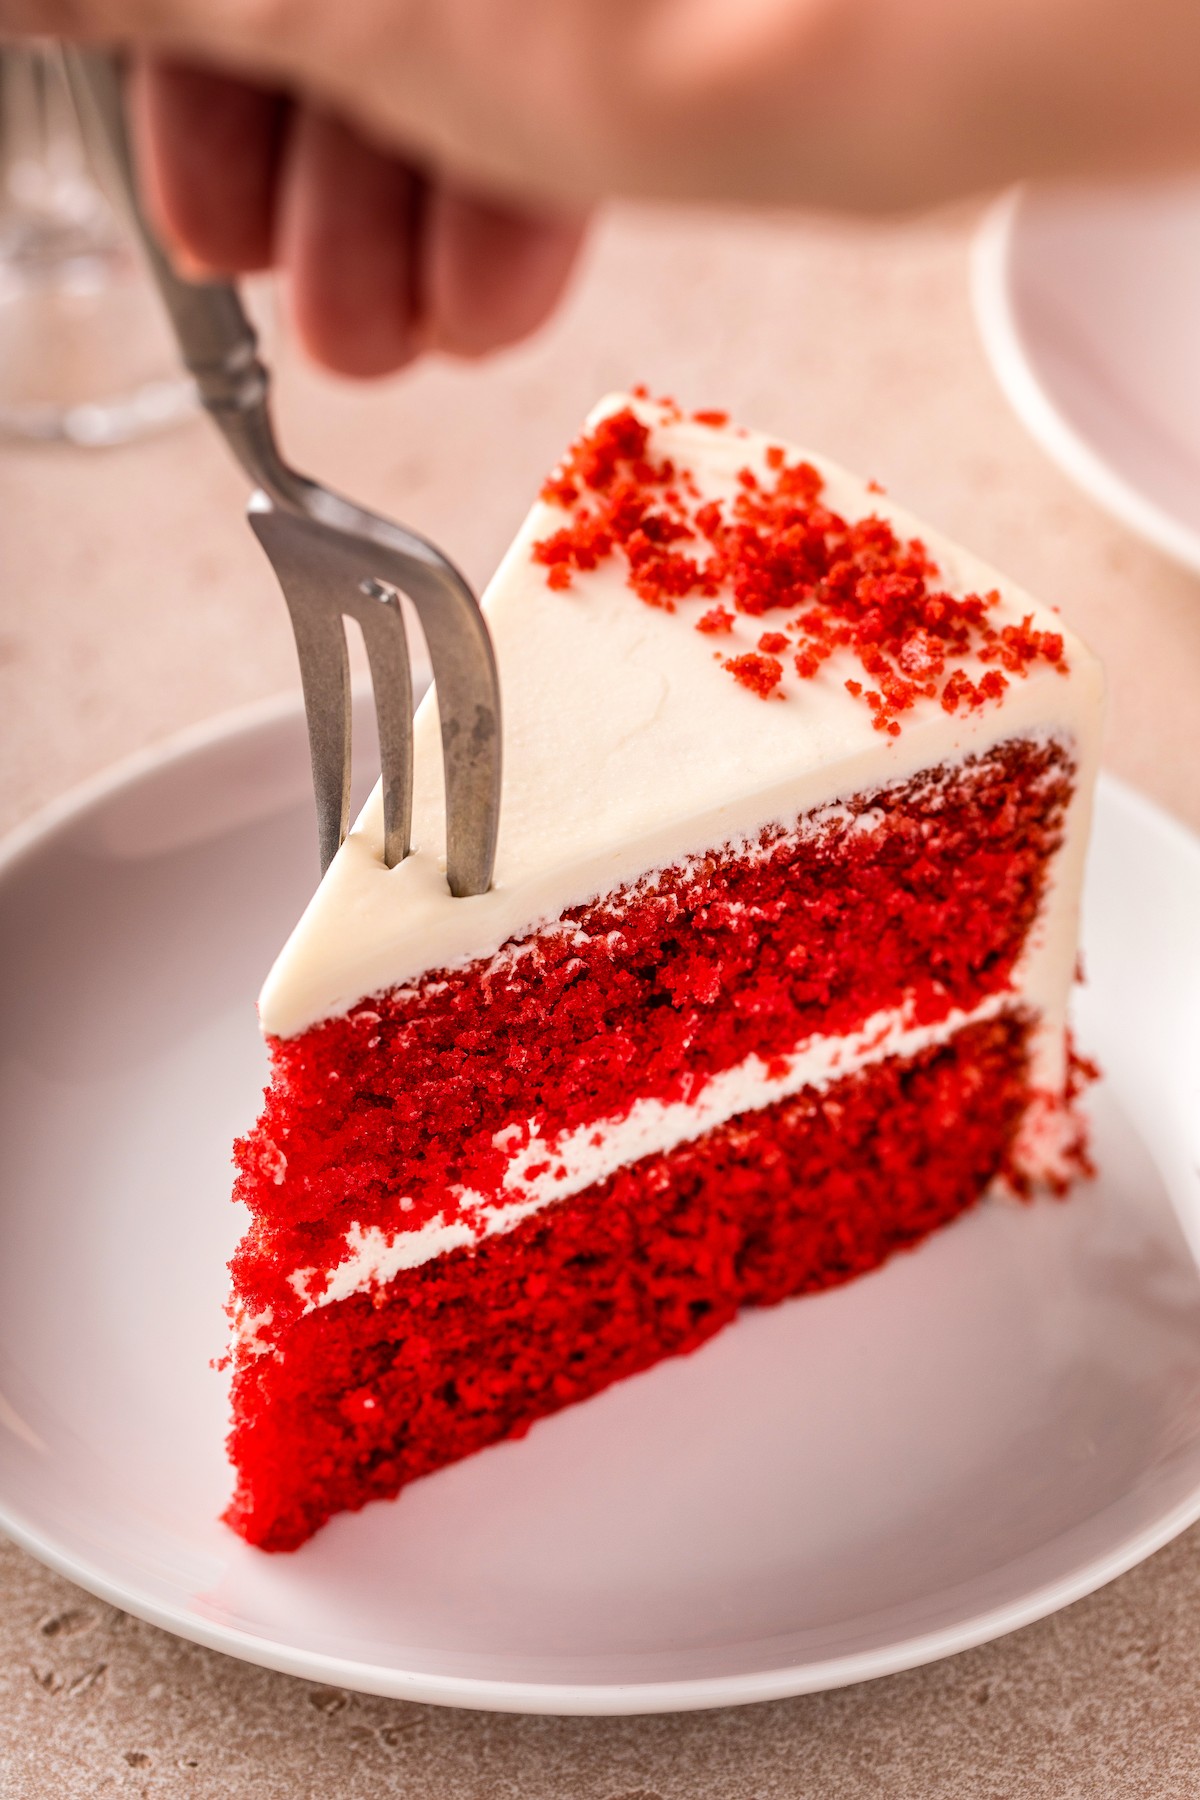 A fork piercing into a slice of frosted layer cake.